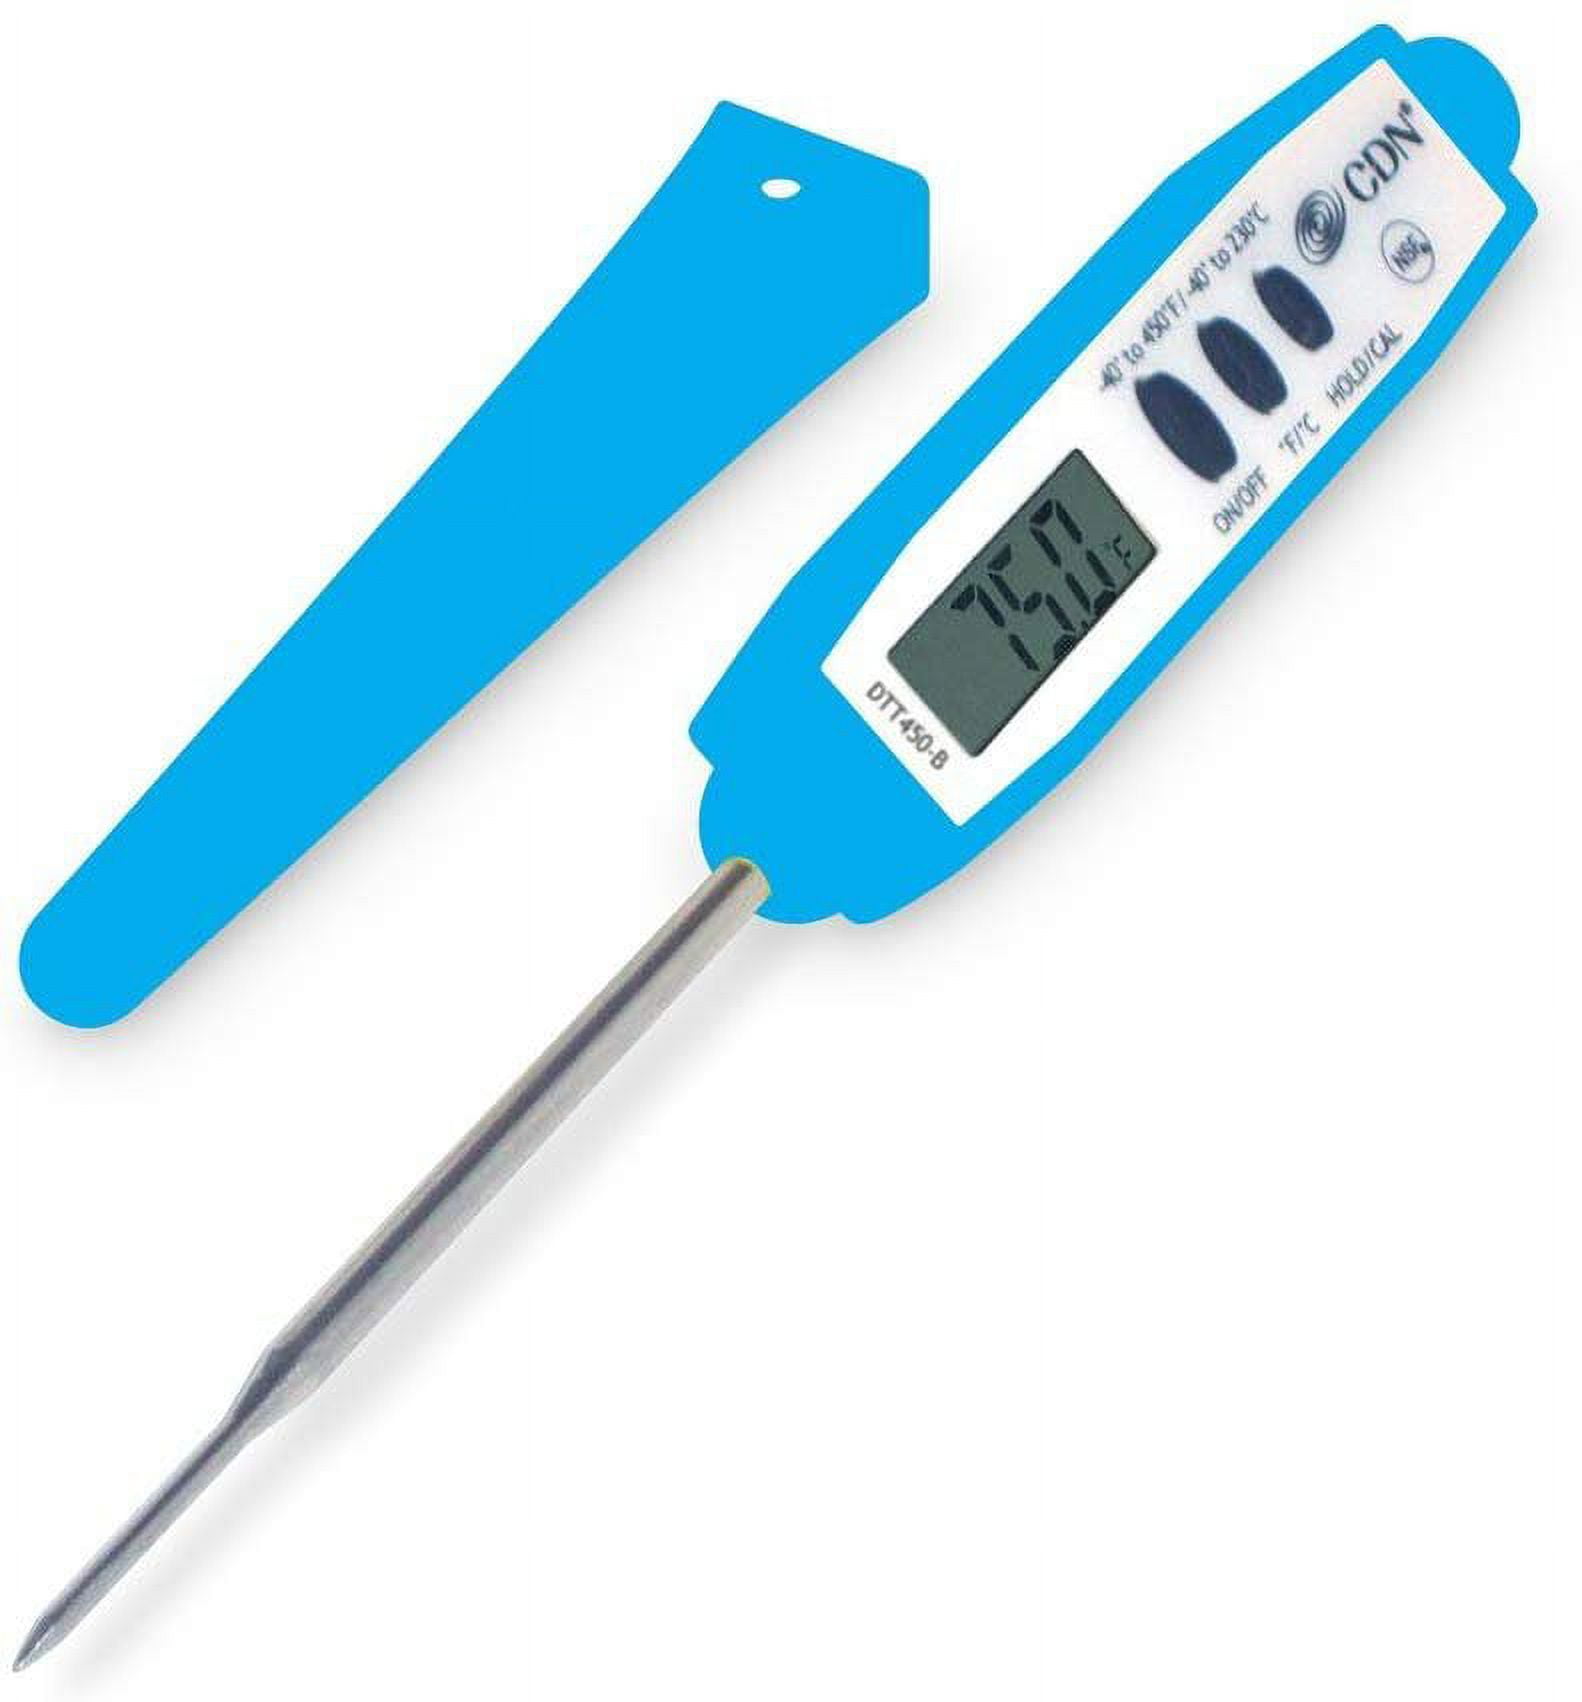 CDN ProAccurate® Insta-Read® Stainless Steel Beverage and Frothing  Thermometer - 5L Stem